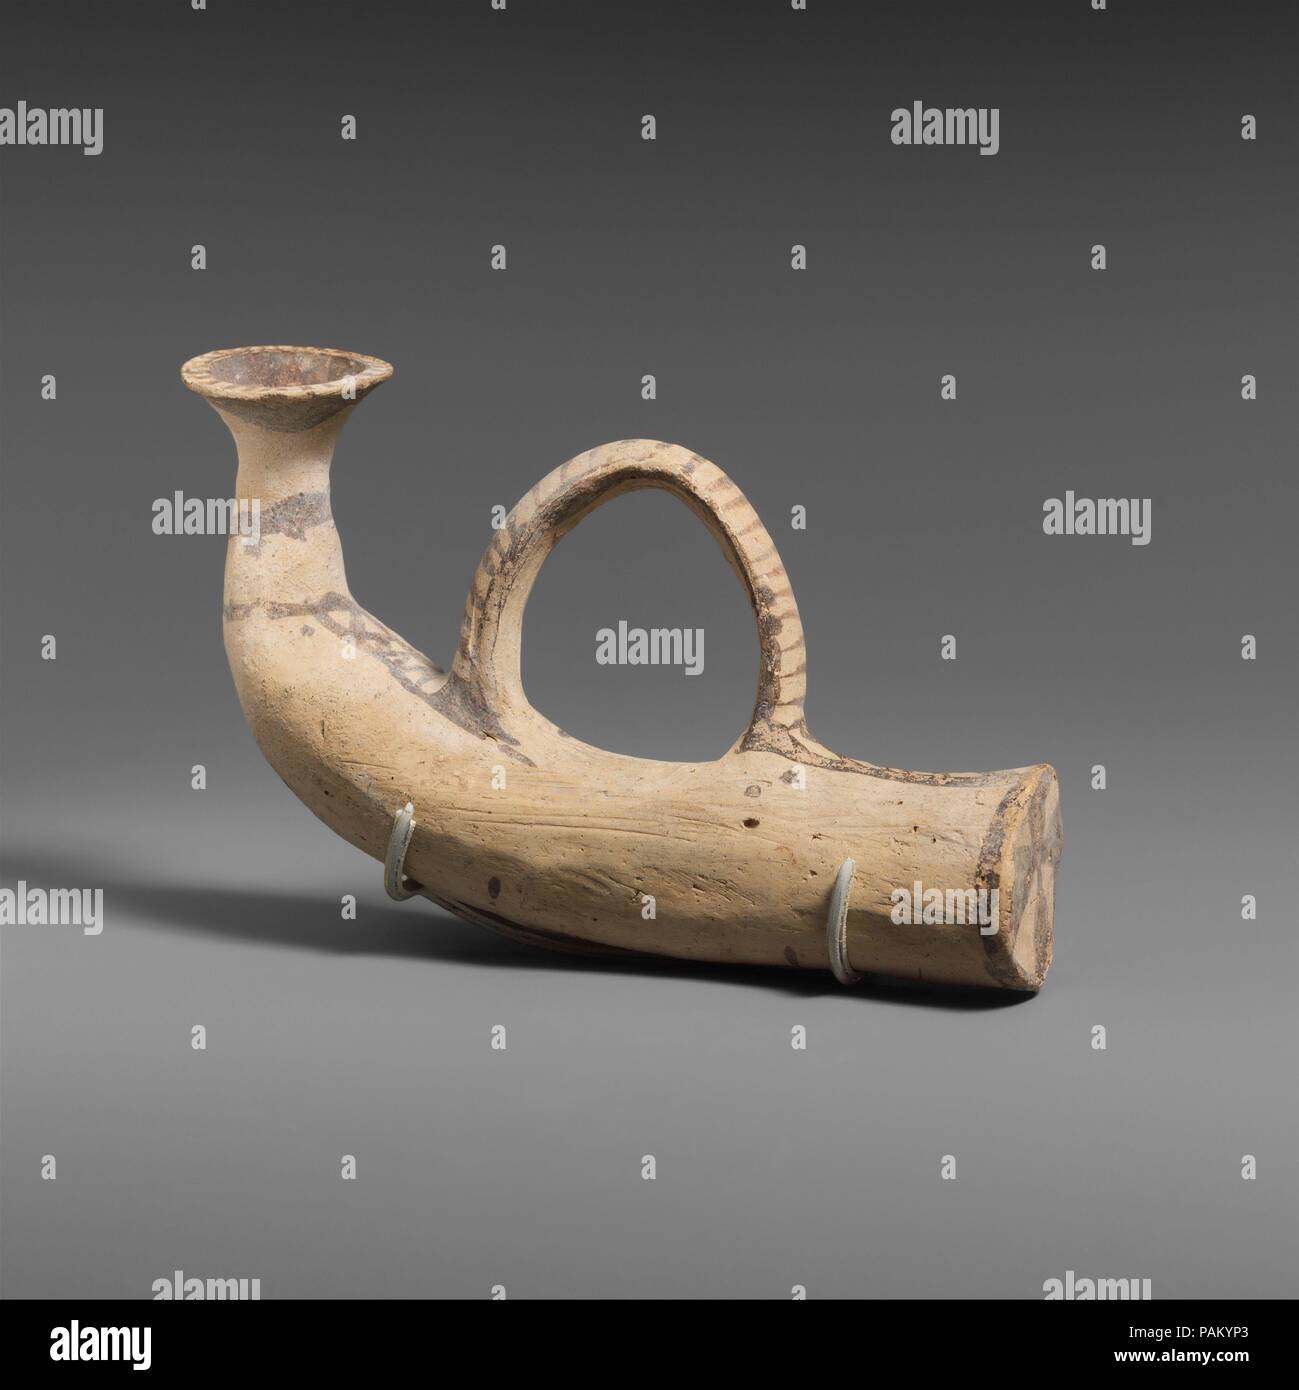 Terracotta vase in the shape of a horn. Culture: Cypriot. Dimensions: H. 3 11/16 in. (9.4 cm); length 6 5/16 in. (16 cm). Date: 1050-950 B.C..  An animal horn lends itself naturally for use in drinking and pouring libations, The clay version preserves details such as the articulated mouthpiece and the strap, here serving as a handle. Museum: Metropolitan Museum of Art, New York, USA. Stock Photo